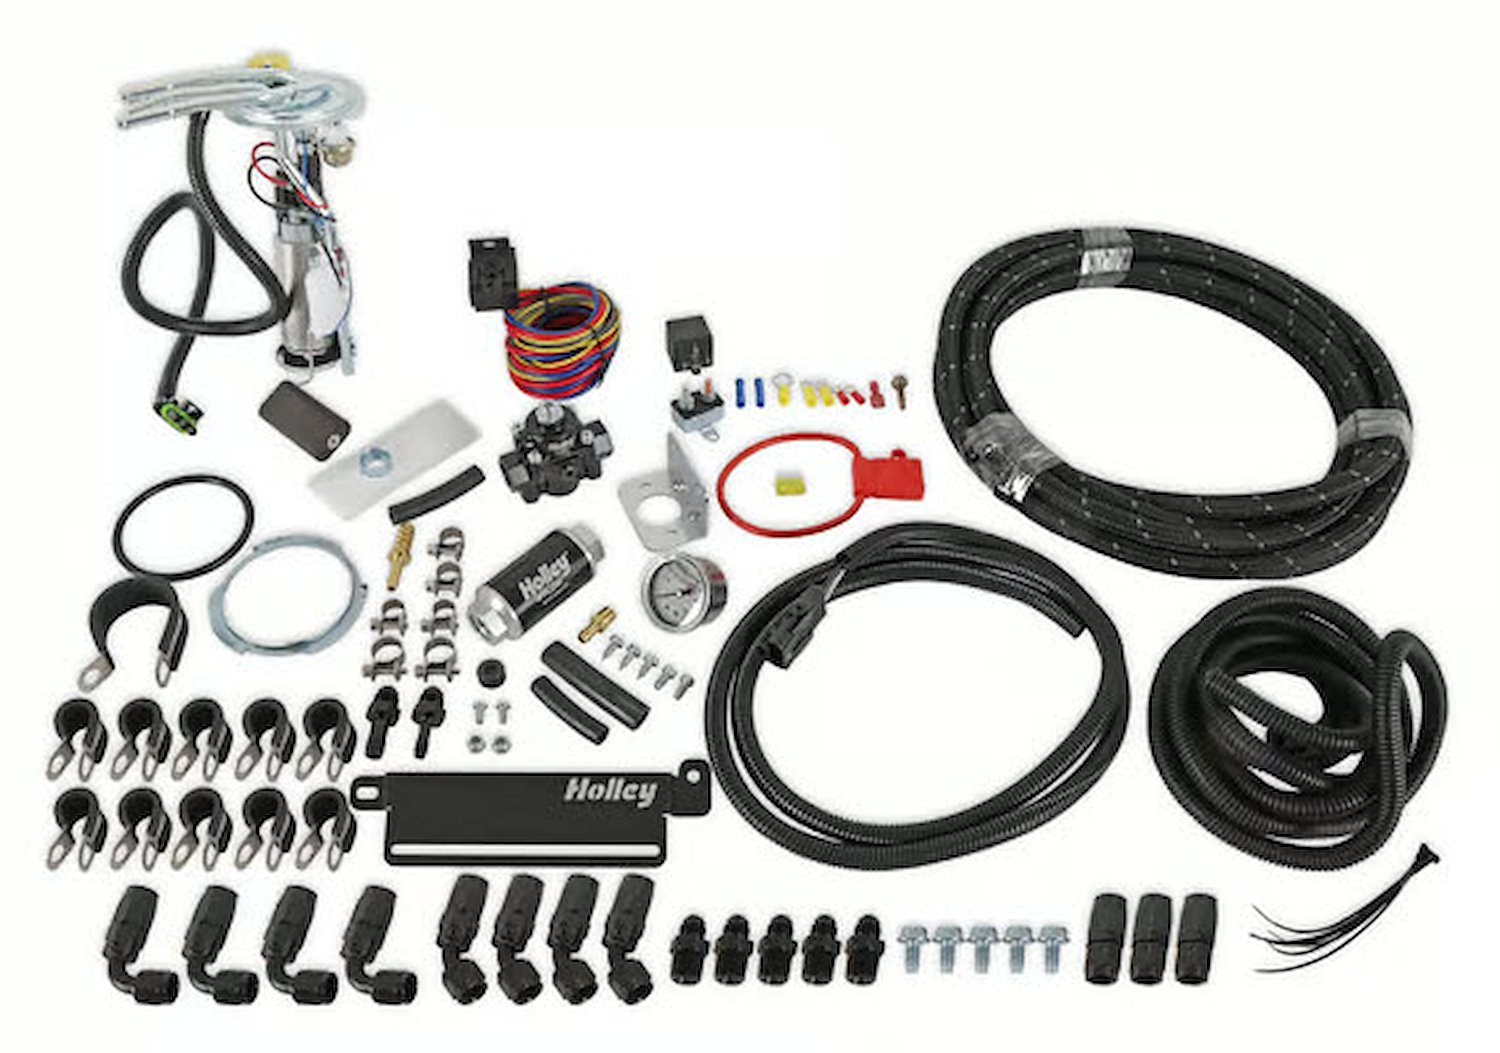 526-24 Return-Style Fuel System Kit for Select  1978-1987 GM Cars [350 LPH]